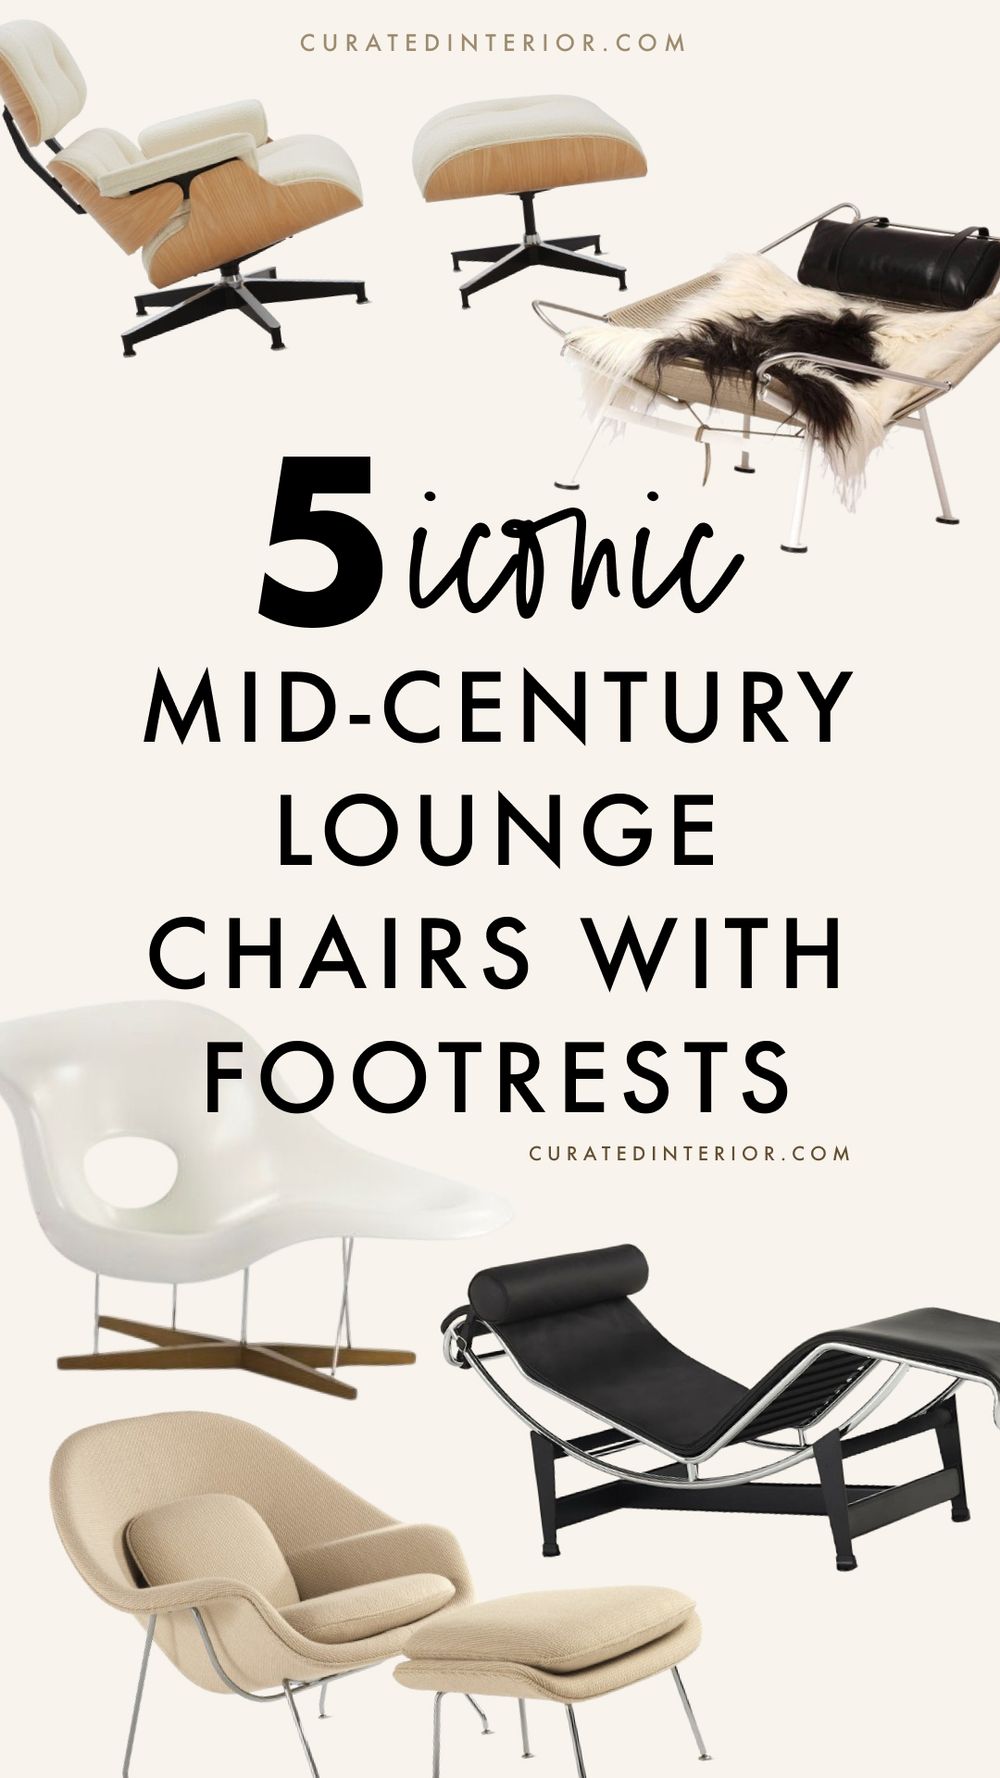 5 Iconic Mid-Century Lounge Chairs with Footrests